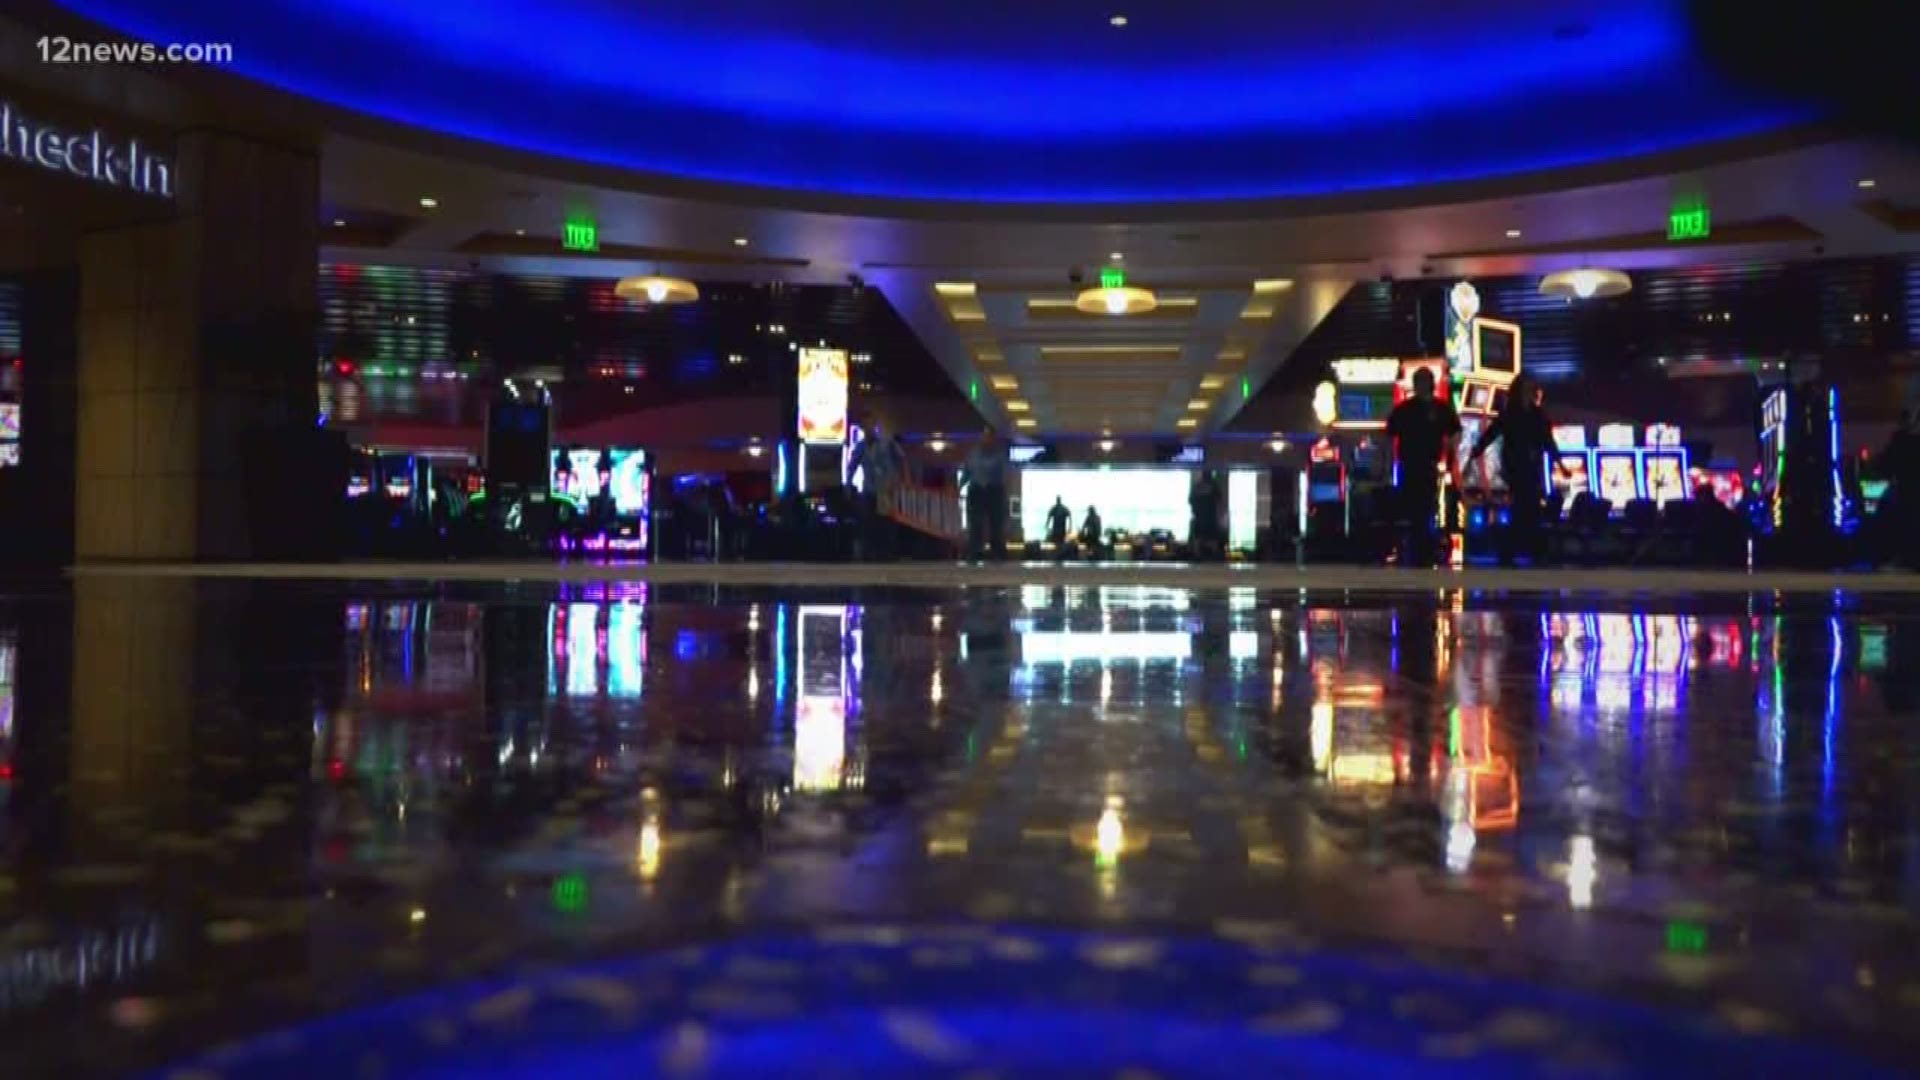 A nasty monsoon storm caused Talking Stick Resort and Casino to close for a month and a half. We get a preview of the casino and resort before it is set to reopen.